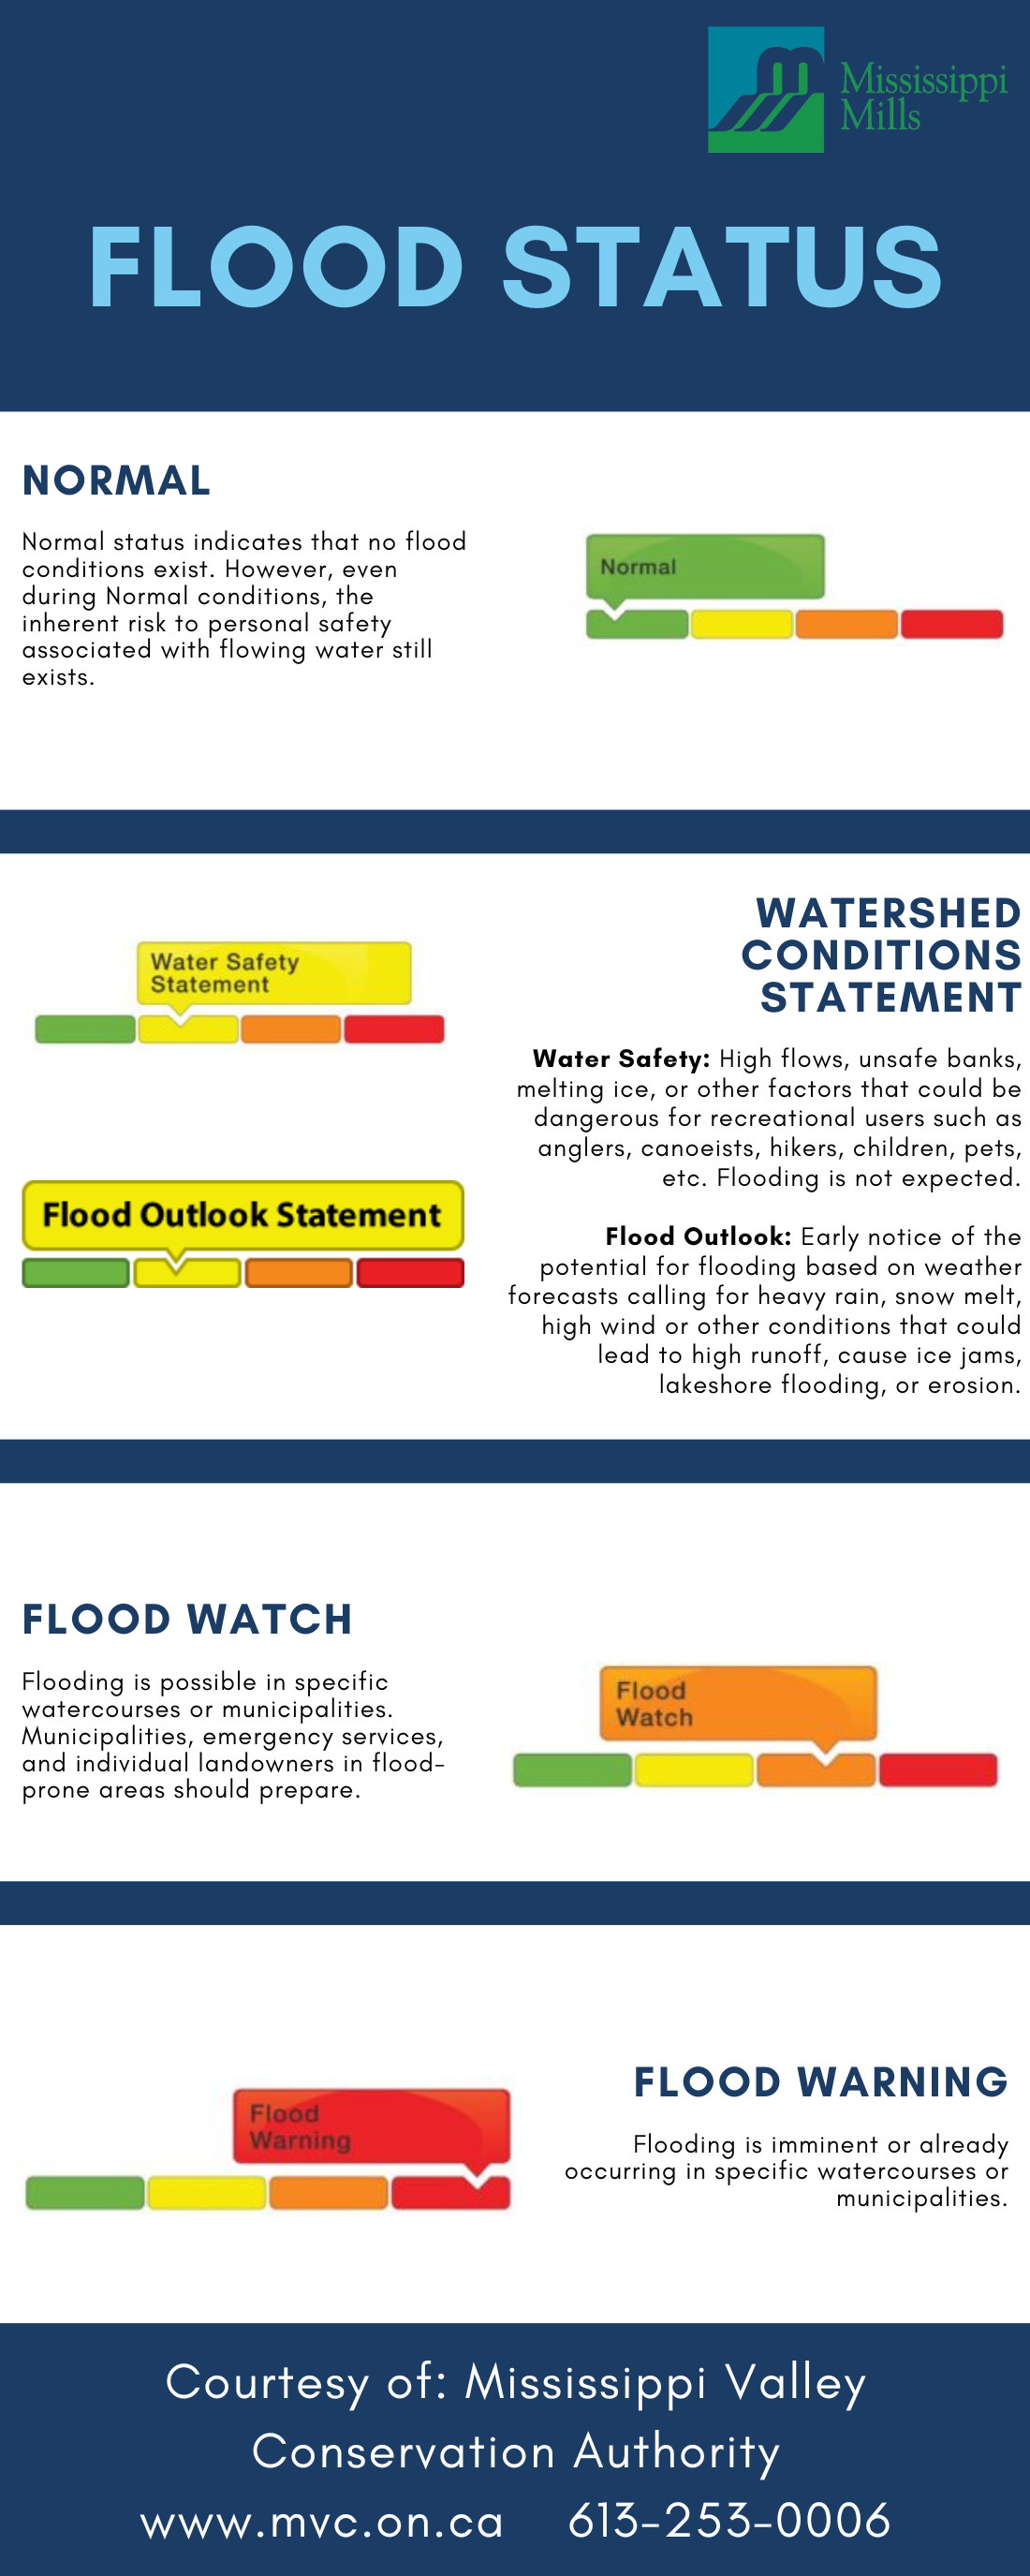 Chart showing levels of flooding